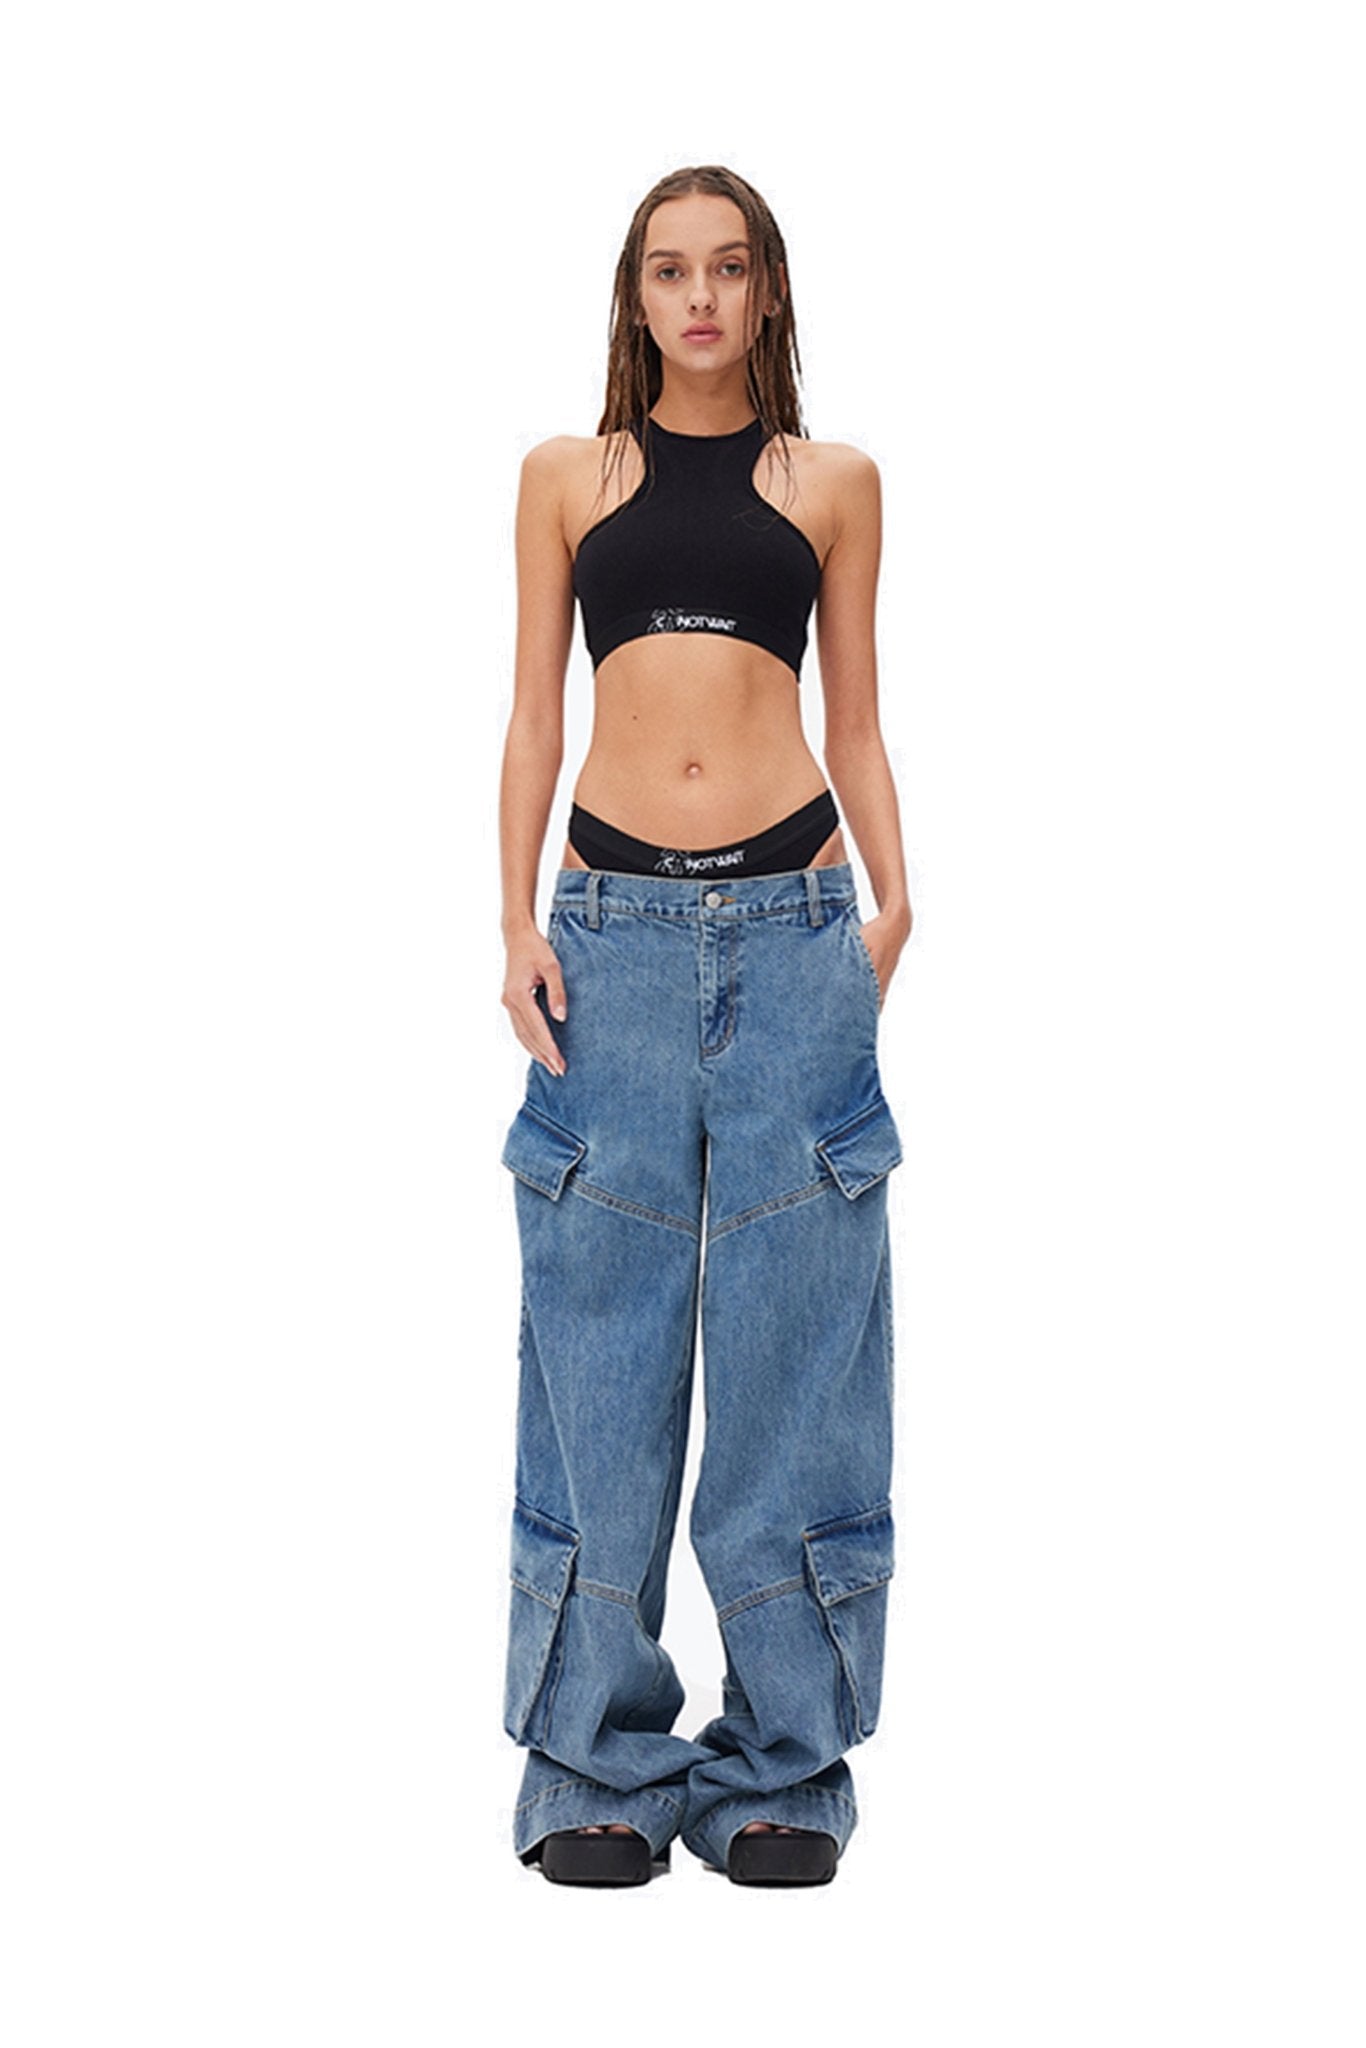 ANN ANDELMAN Blue Low Waist Jeans | MADA IN CHINA